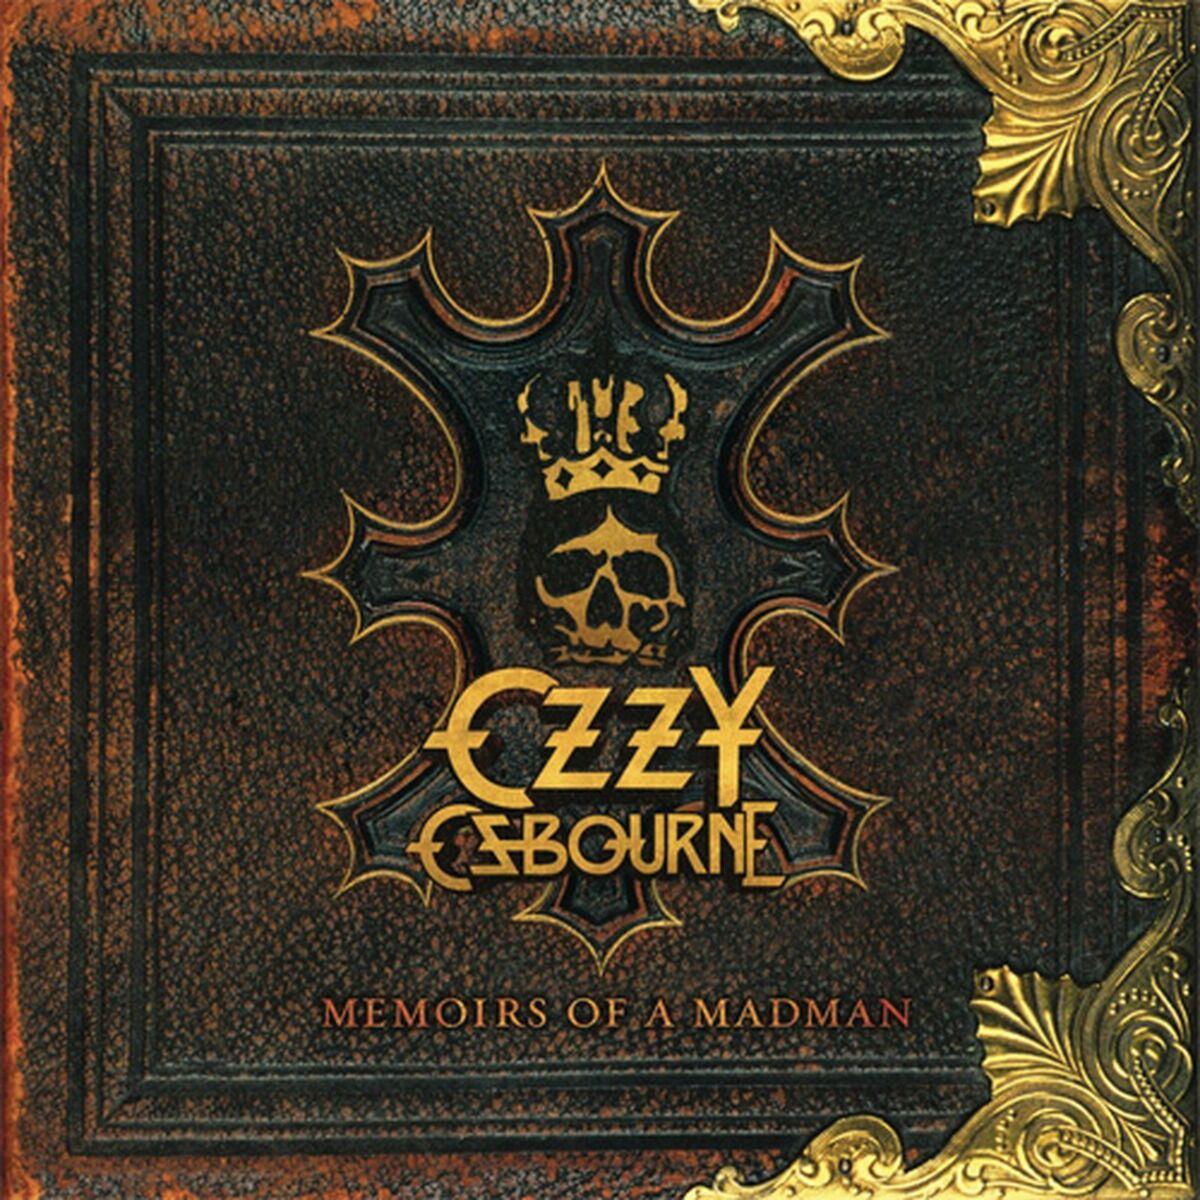 Osbourne Ozzy Memoirs Of A Madman (Remastered) 2LP